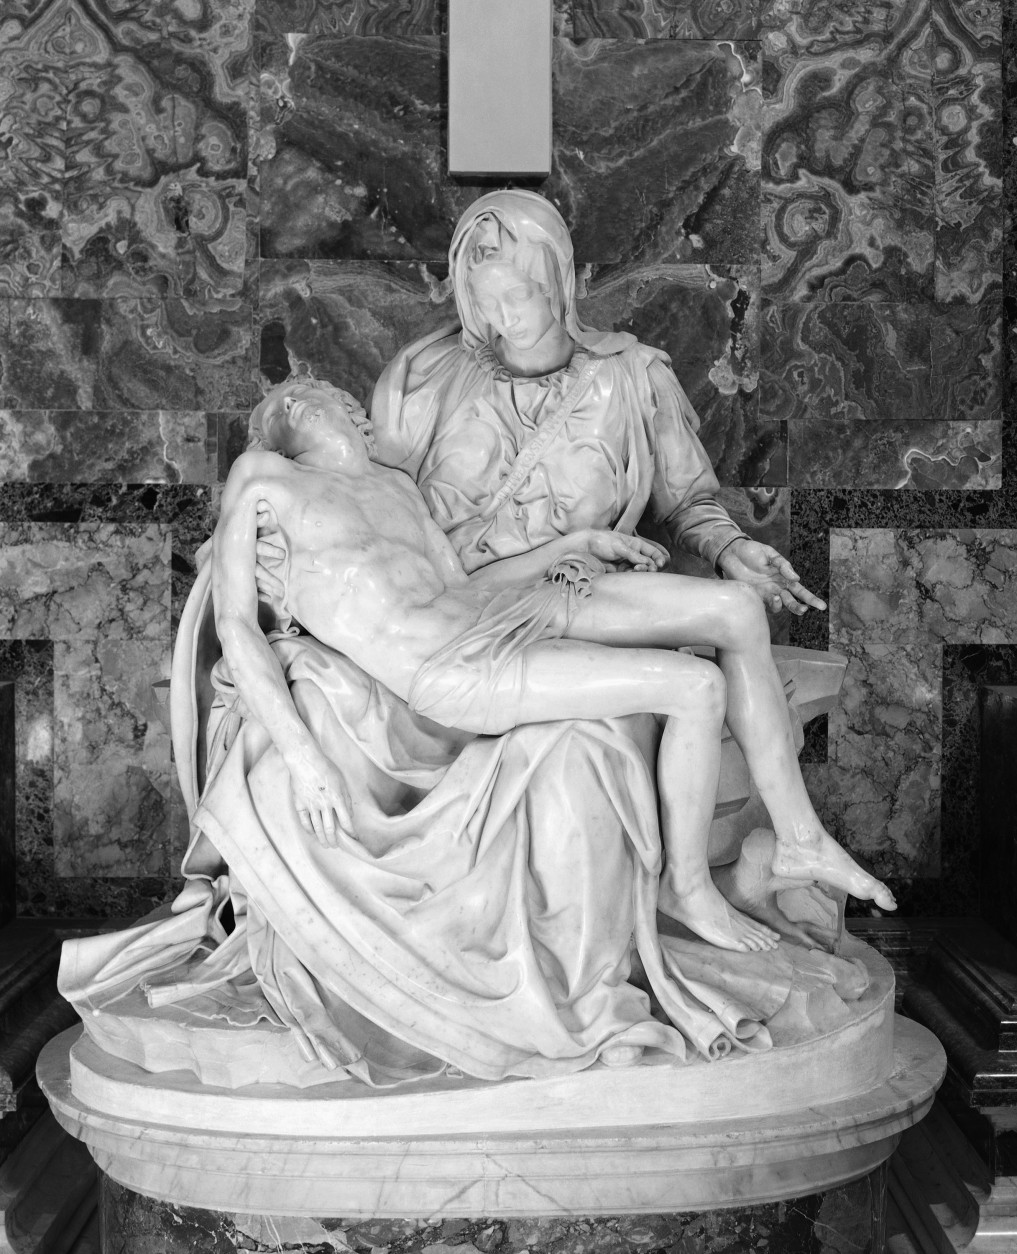 General view of famed Pieta sculpture, created by Michelangelo, shown, Dec.12, 1962, Saint Peters Basilica, Rome, Italy. The statue depicts Mary with the dead Christ lying across her knee, was made by Michelangelo when he was only 25 years old. It is slated to be shipped to America for the 1964 World's Fair, at the request of Francis Cardinal Spellman, Archbishop of New York, to which Pope John XXIII agreed. (AP Photo/Mario Torrisi)